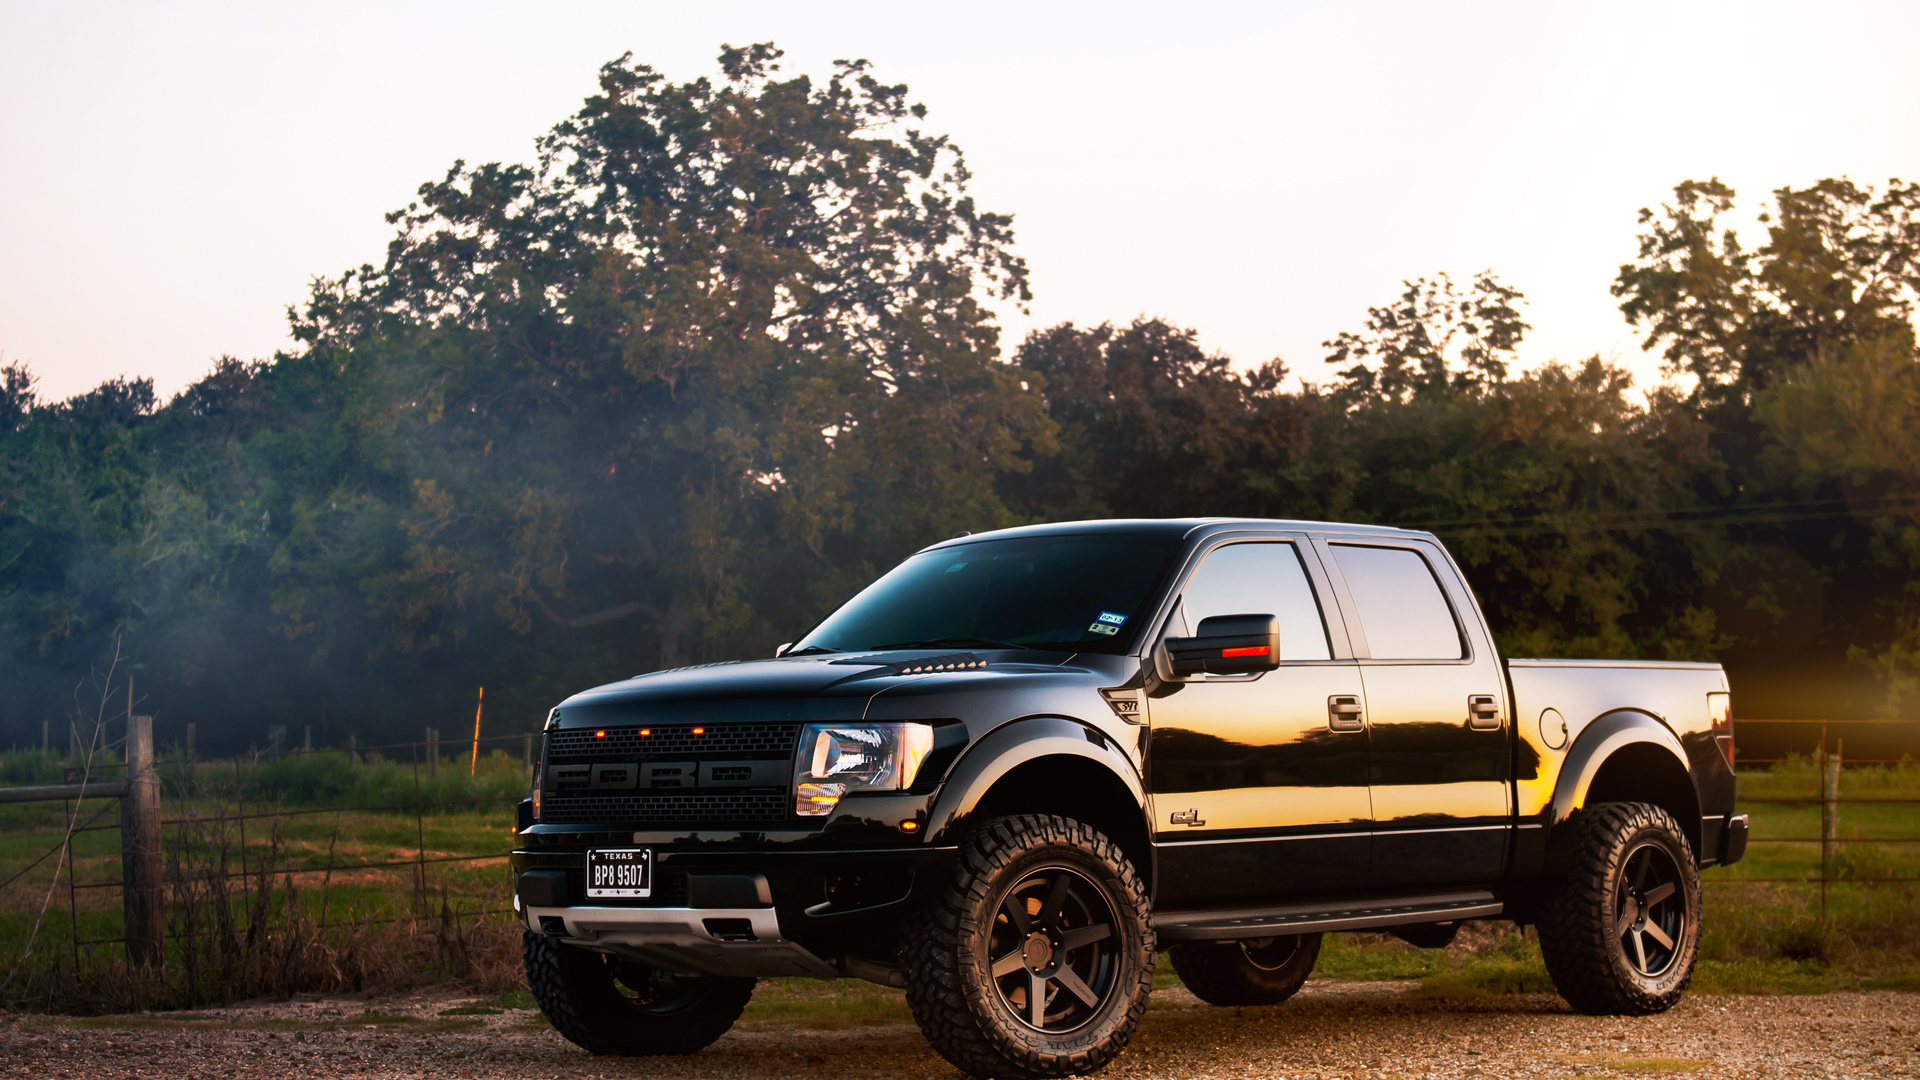 Off Road Ford Pick up Truck Wallpaper   iBackgroundWallpaper